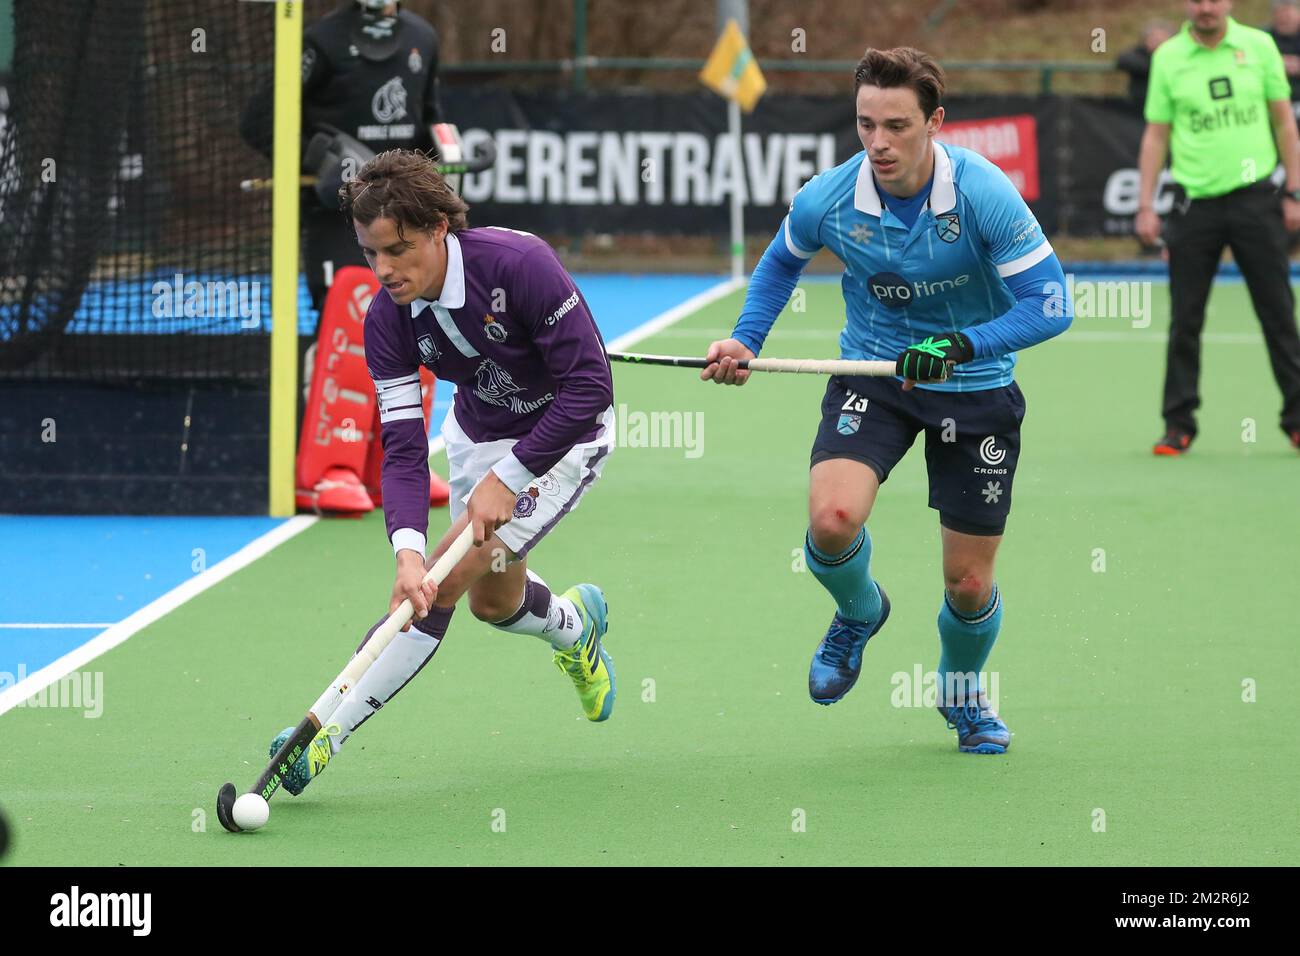 Beerschot's Harrison Peeters and Braxgata's Jim Briels fight for the ball during a hockey game between Braxgata Hockey Club and R. Beerschot T.H.C., on day 11 of the 'Audi league' hockey competition, Sunday 03 March 2019 in Boom. BELGA PHOTO BRUNO FAHY Stock Photo